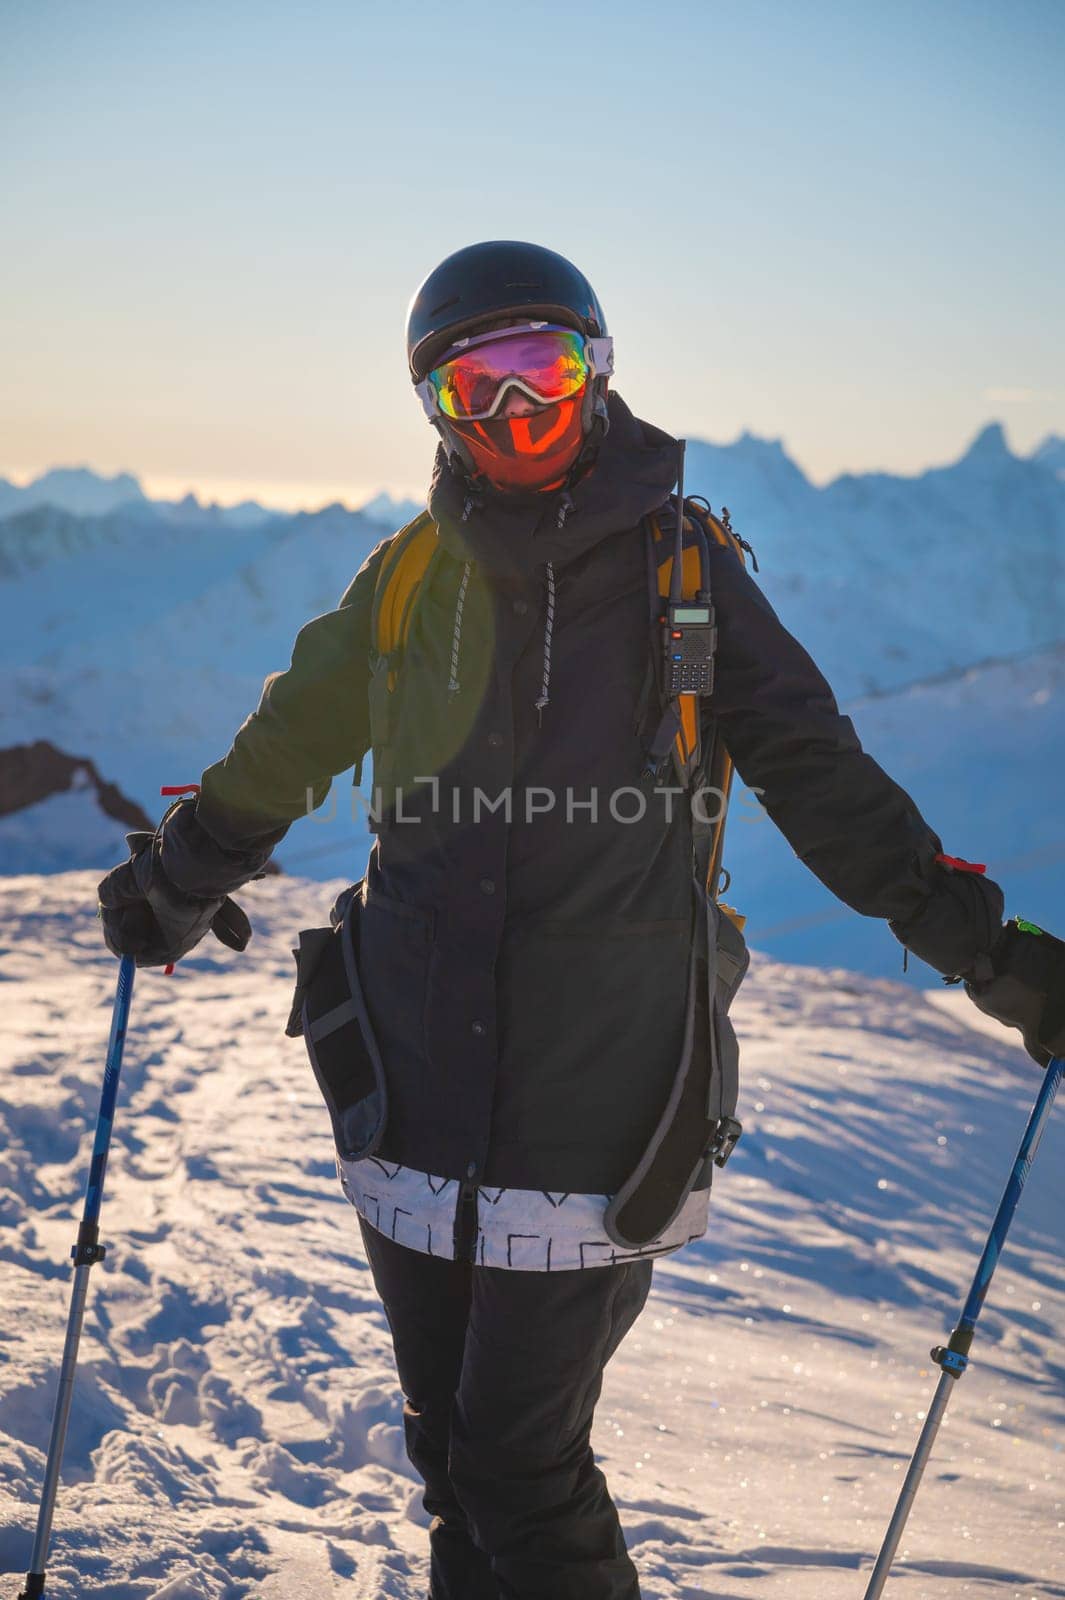 Winter skis. Ski portrait of a woman skier. Portrait of happy skier holding sticks and looking at camera against snowy mountains at sunset in the background by yanik88